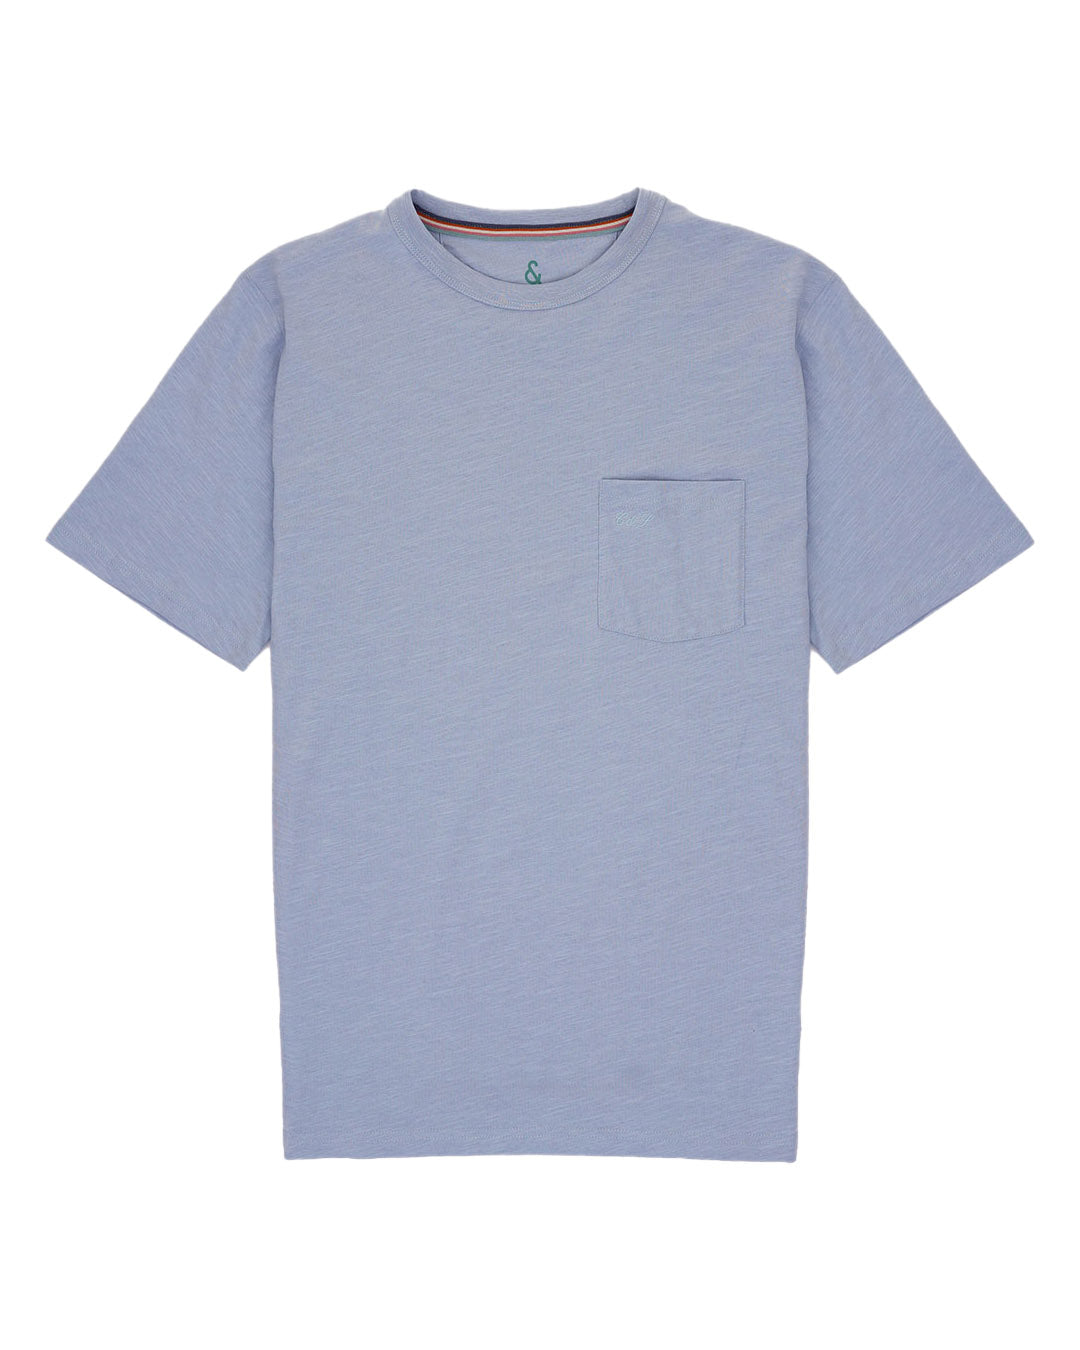 T-Shirt Slub in Sky T-Shirts Colours and Sons   